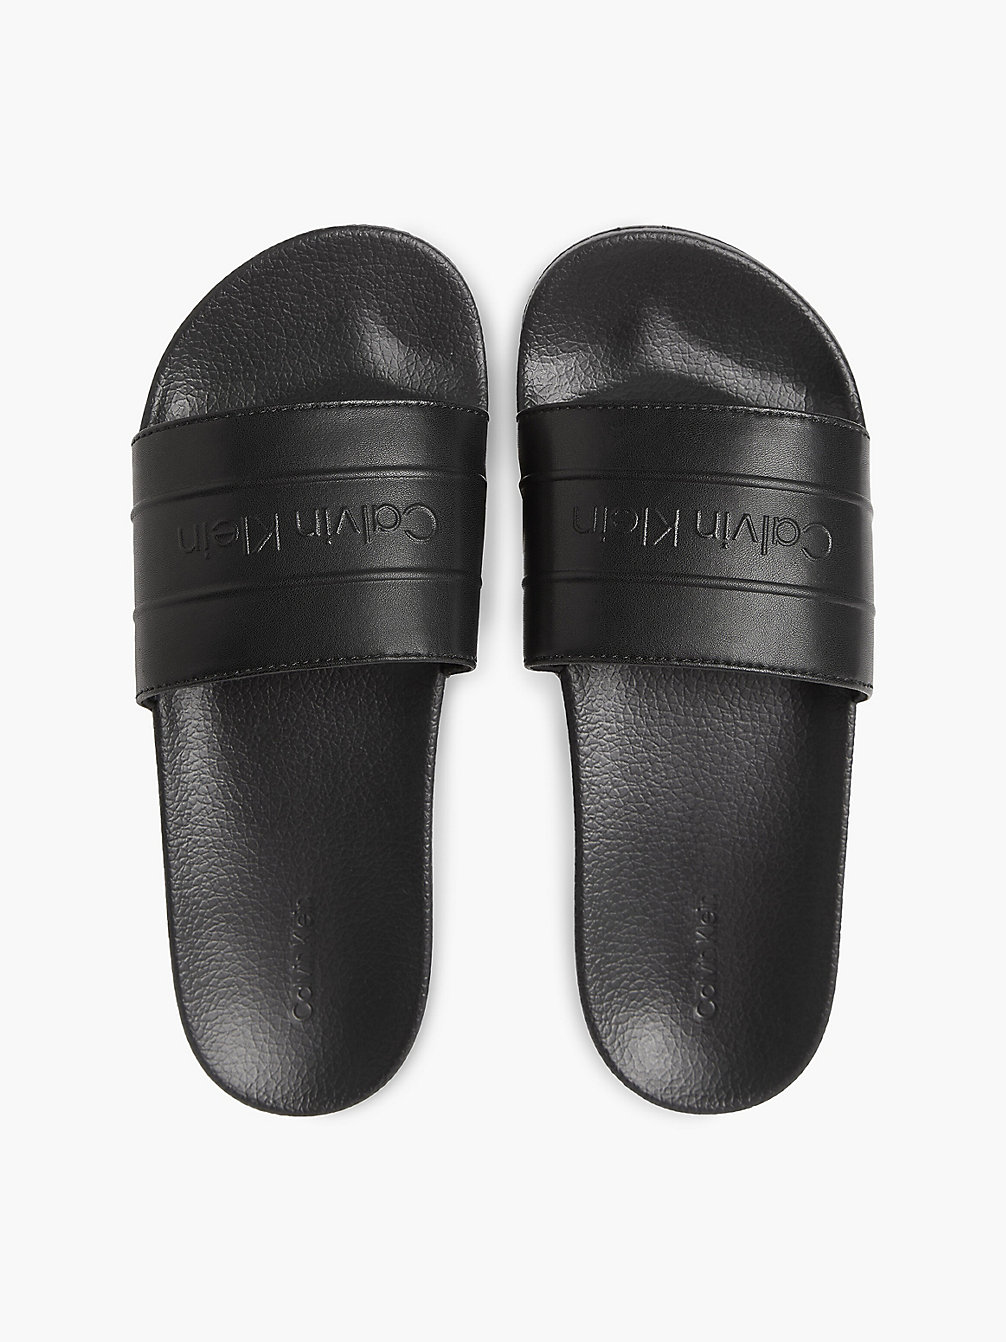 CK BLACK Recycled Faux Leather Sliders undefined women Calvin Klein